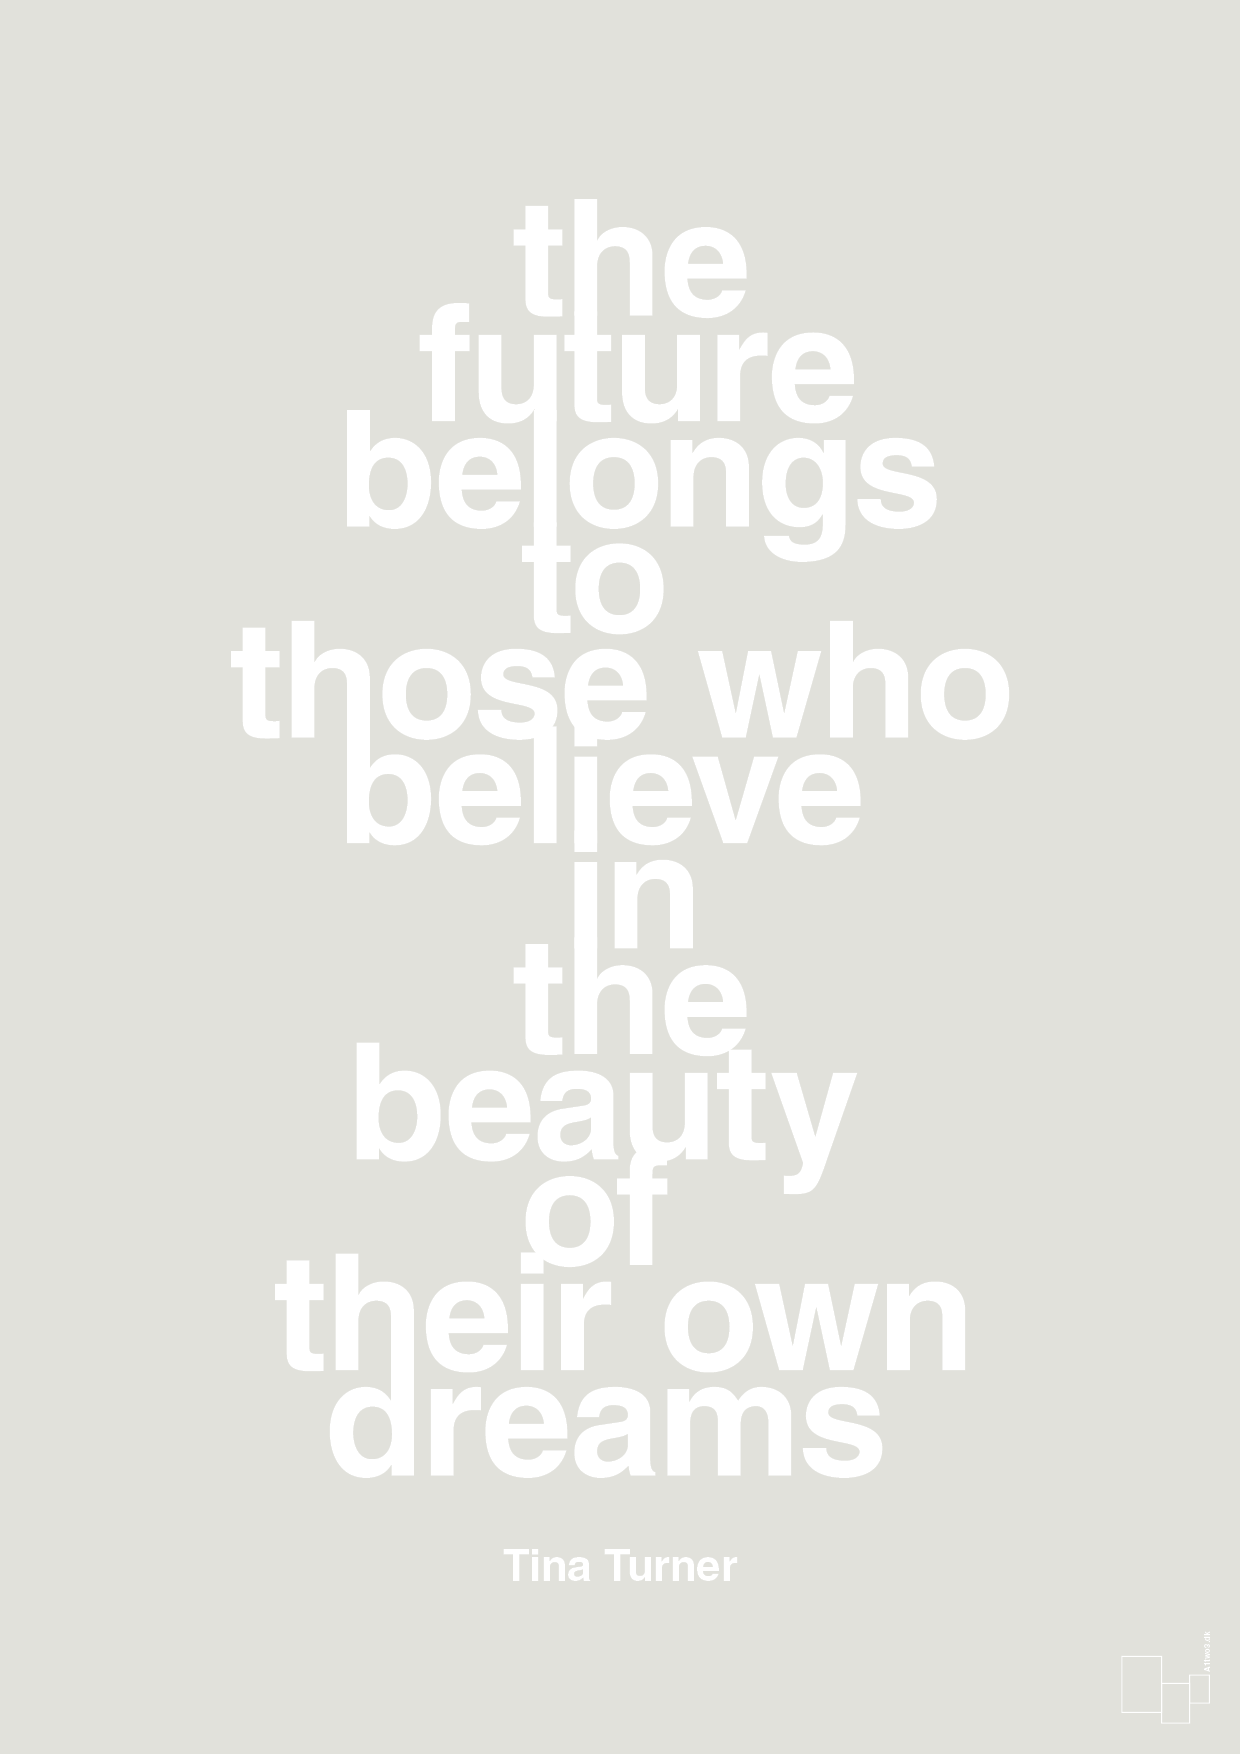 the future belongs to those who believe in the beauty of their own dreams - Plakat med Citater i Painters White